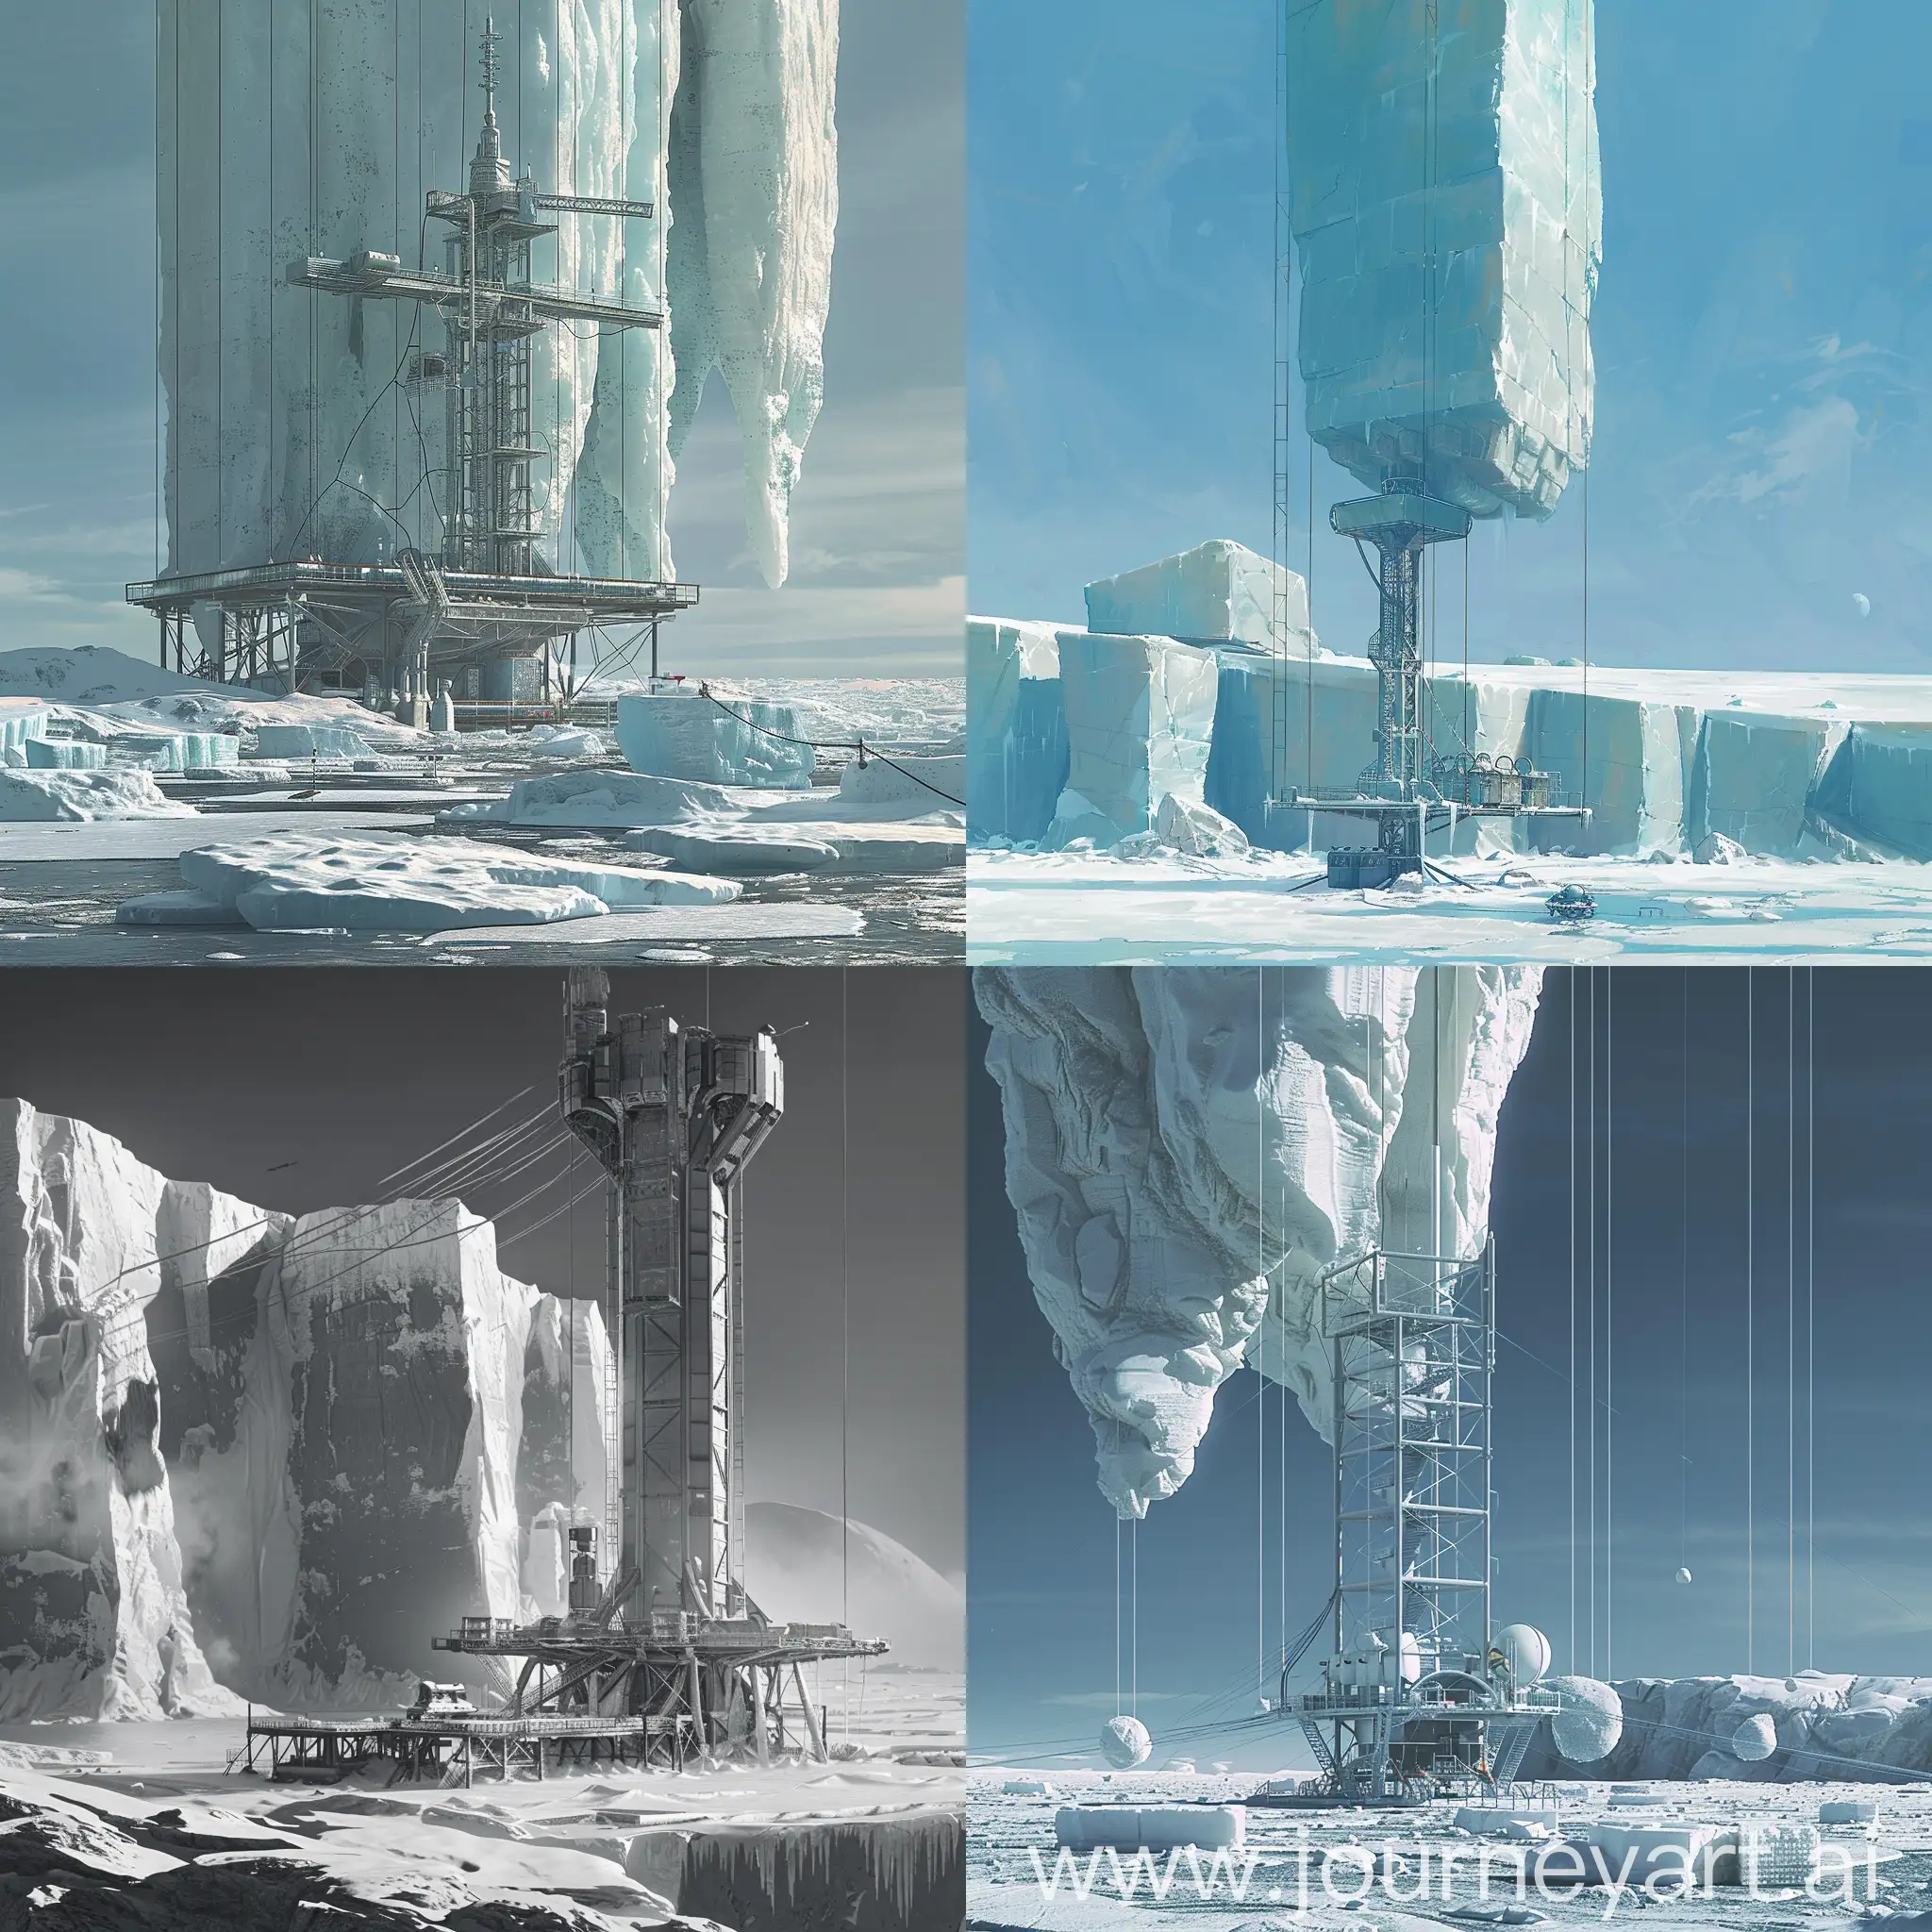 Control-Center-Tower-on-Icy-Plain-Spacecraft-Landing-Site-on-Planet-Amalthea